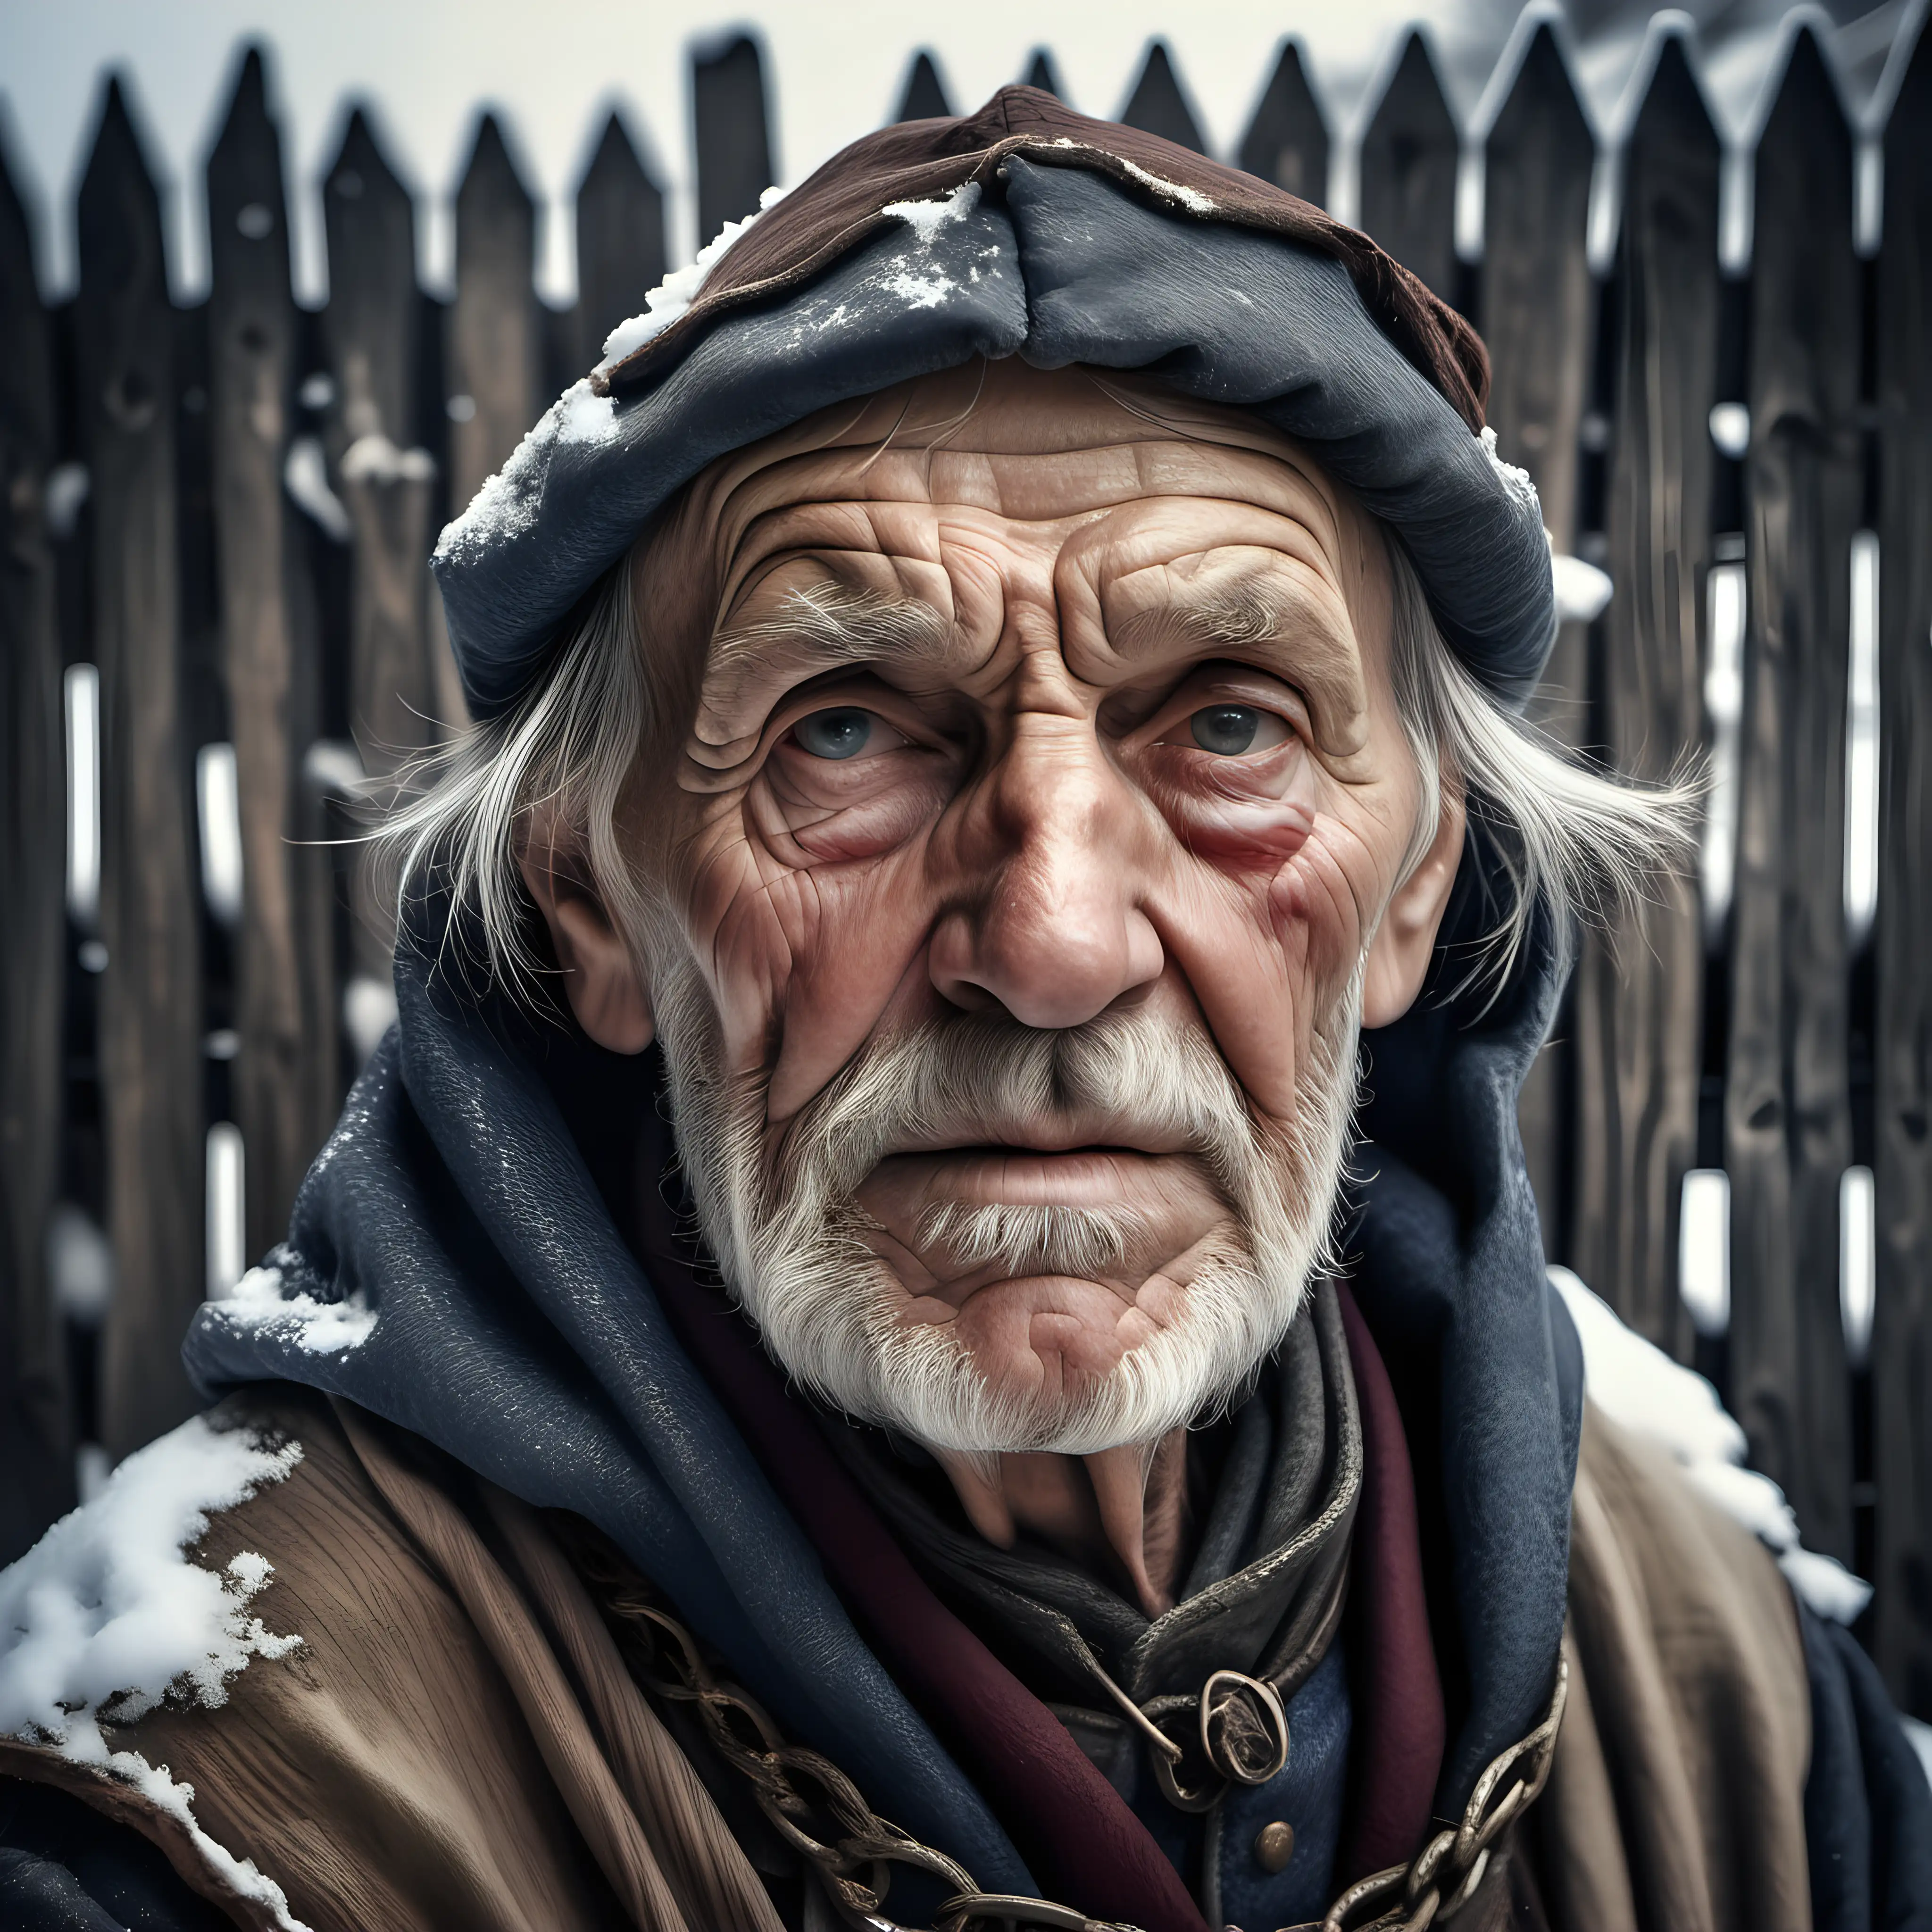 Weathered Medieval Merchant Portrait in Snowy Setting